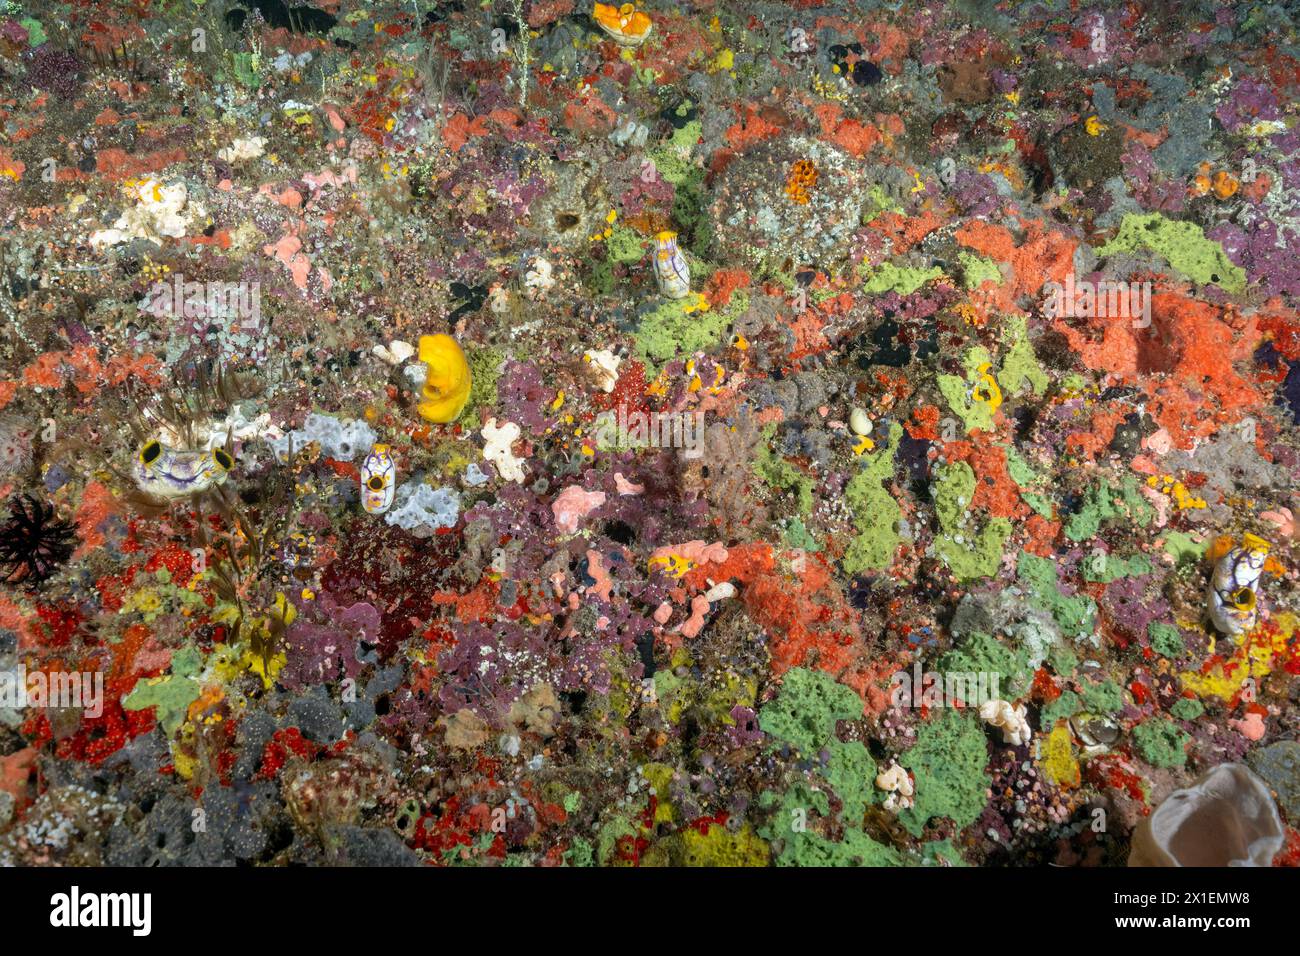 Colorful encrusting sponges covering the wall of limestone rock, Raja Ampat Indonesia. Stock Photo